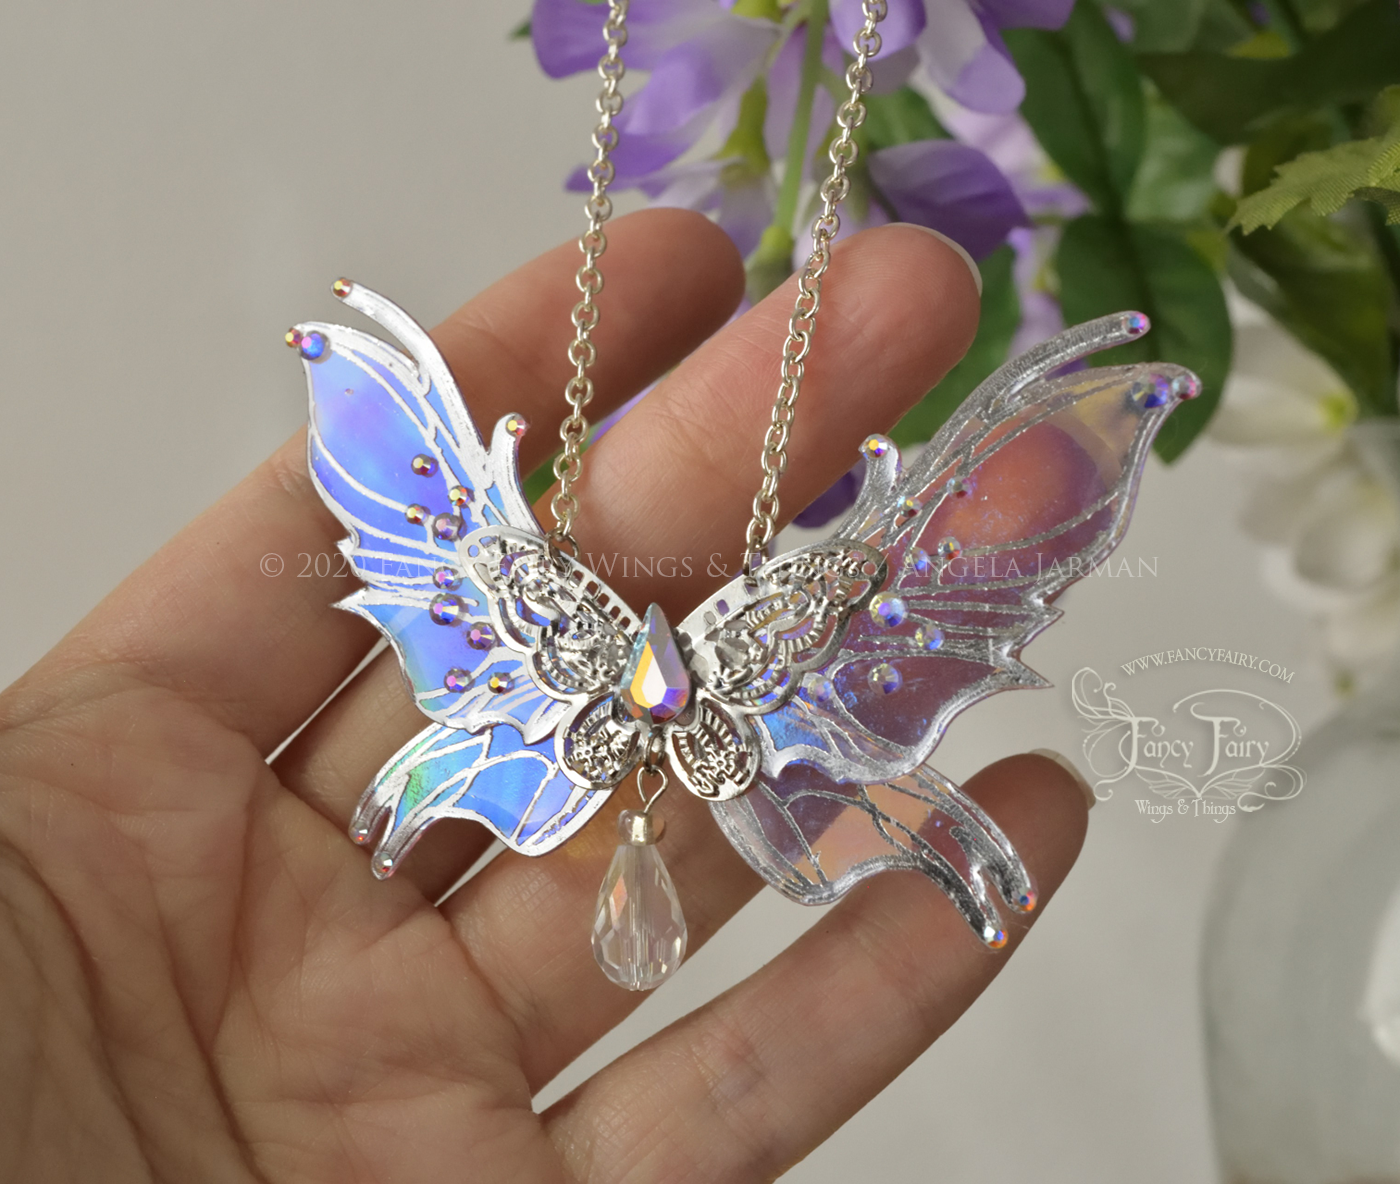 'Nightshade' 3 and 1/2 inch Fairy Wing Necklace in Light Crystal with Silver Accents